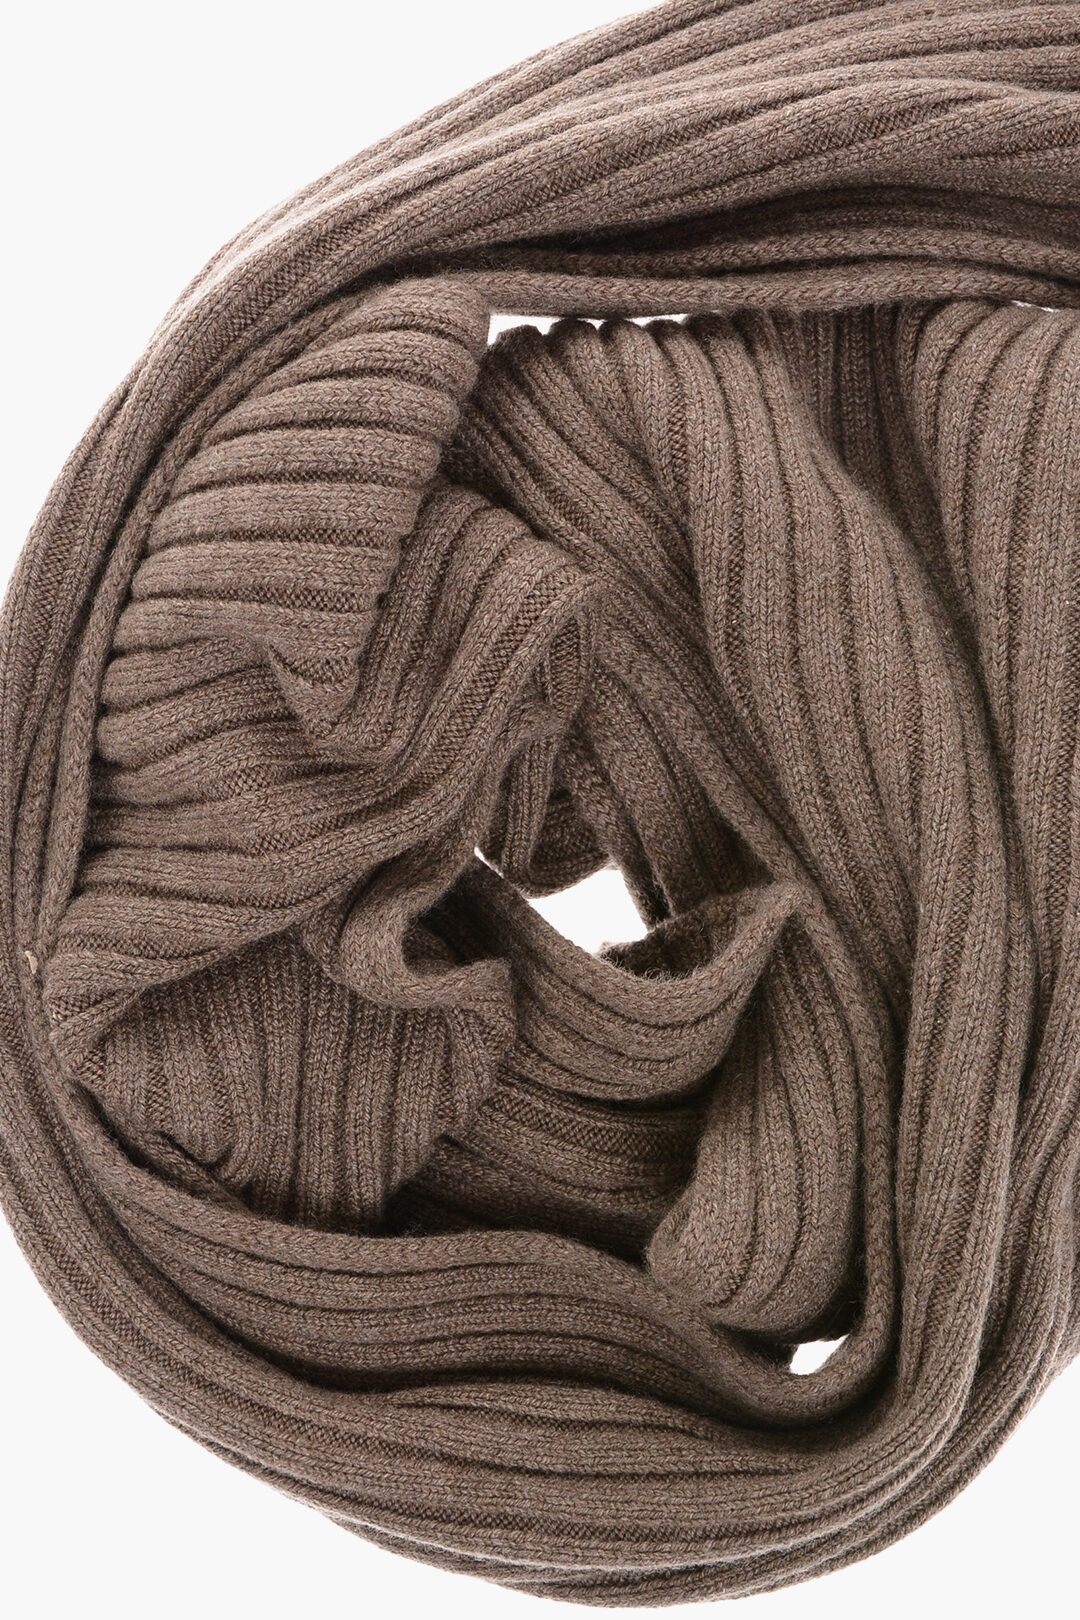 Pure Cashmere Scarf - Solid